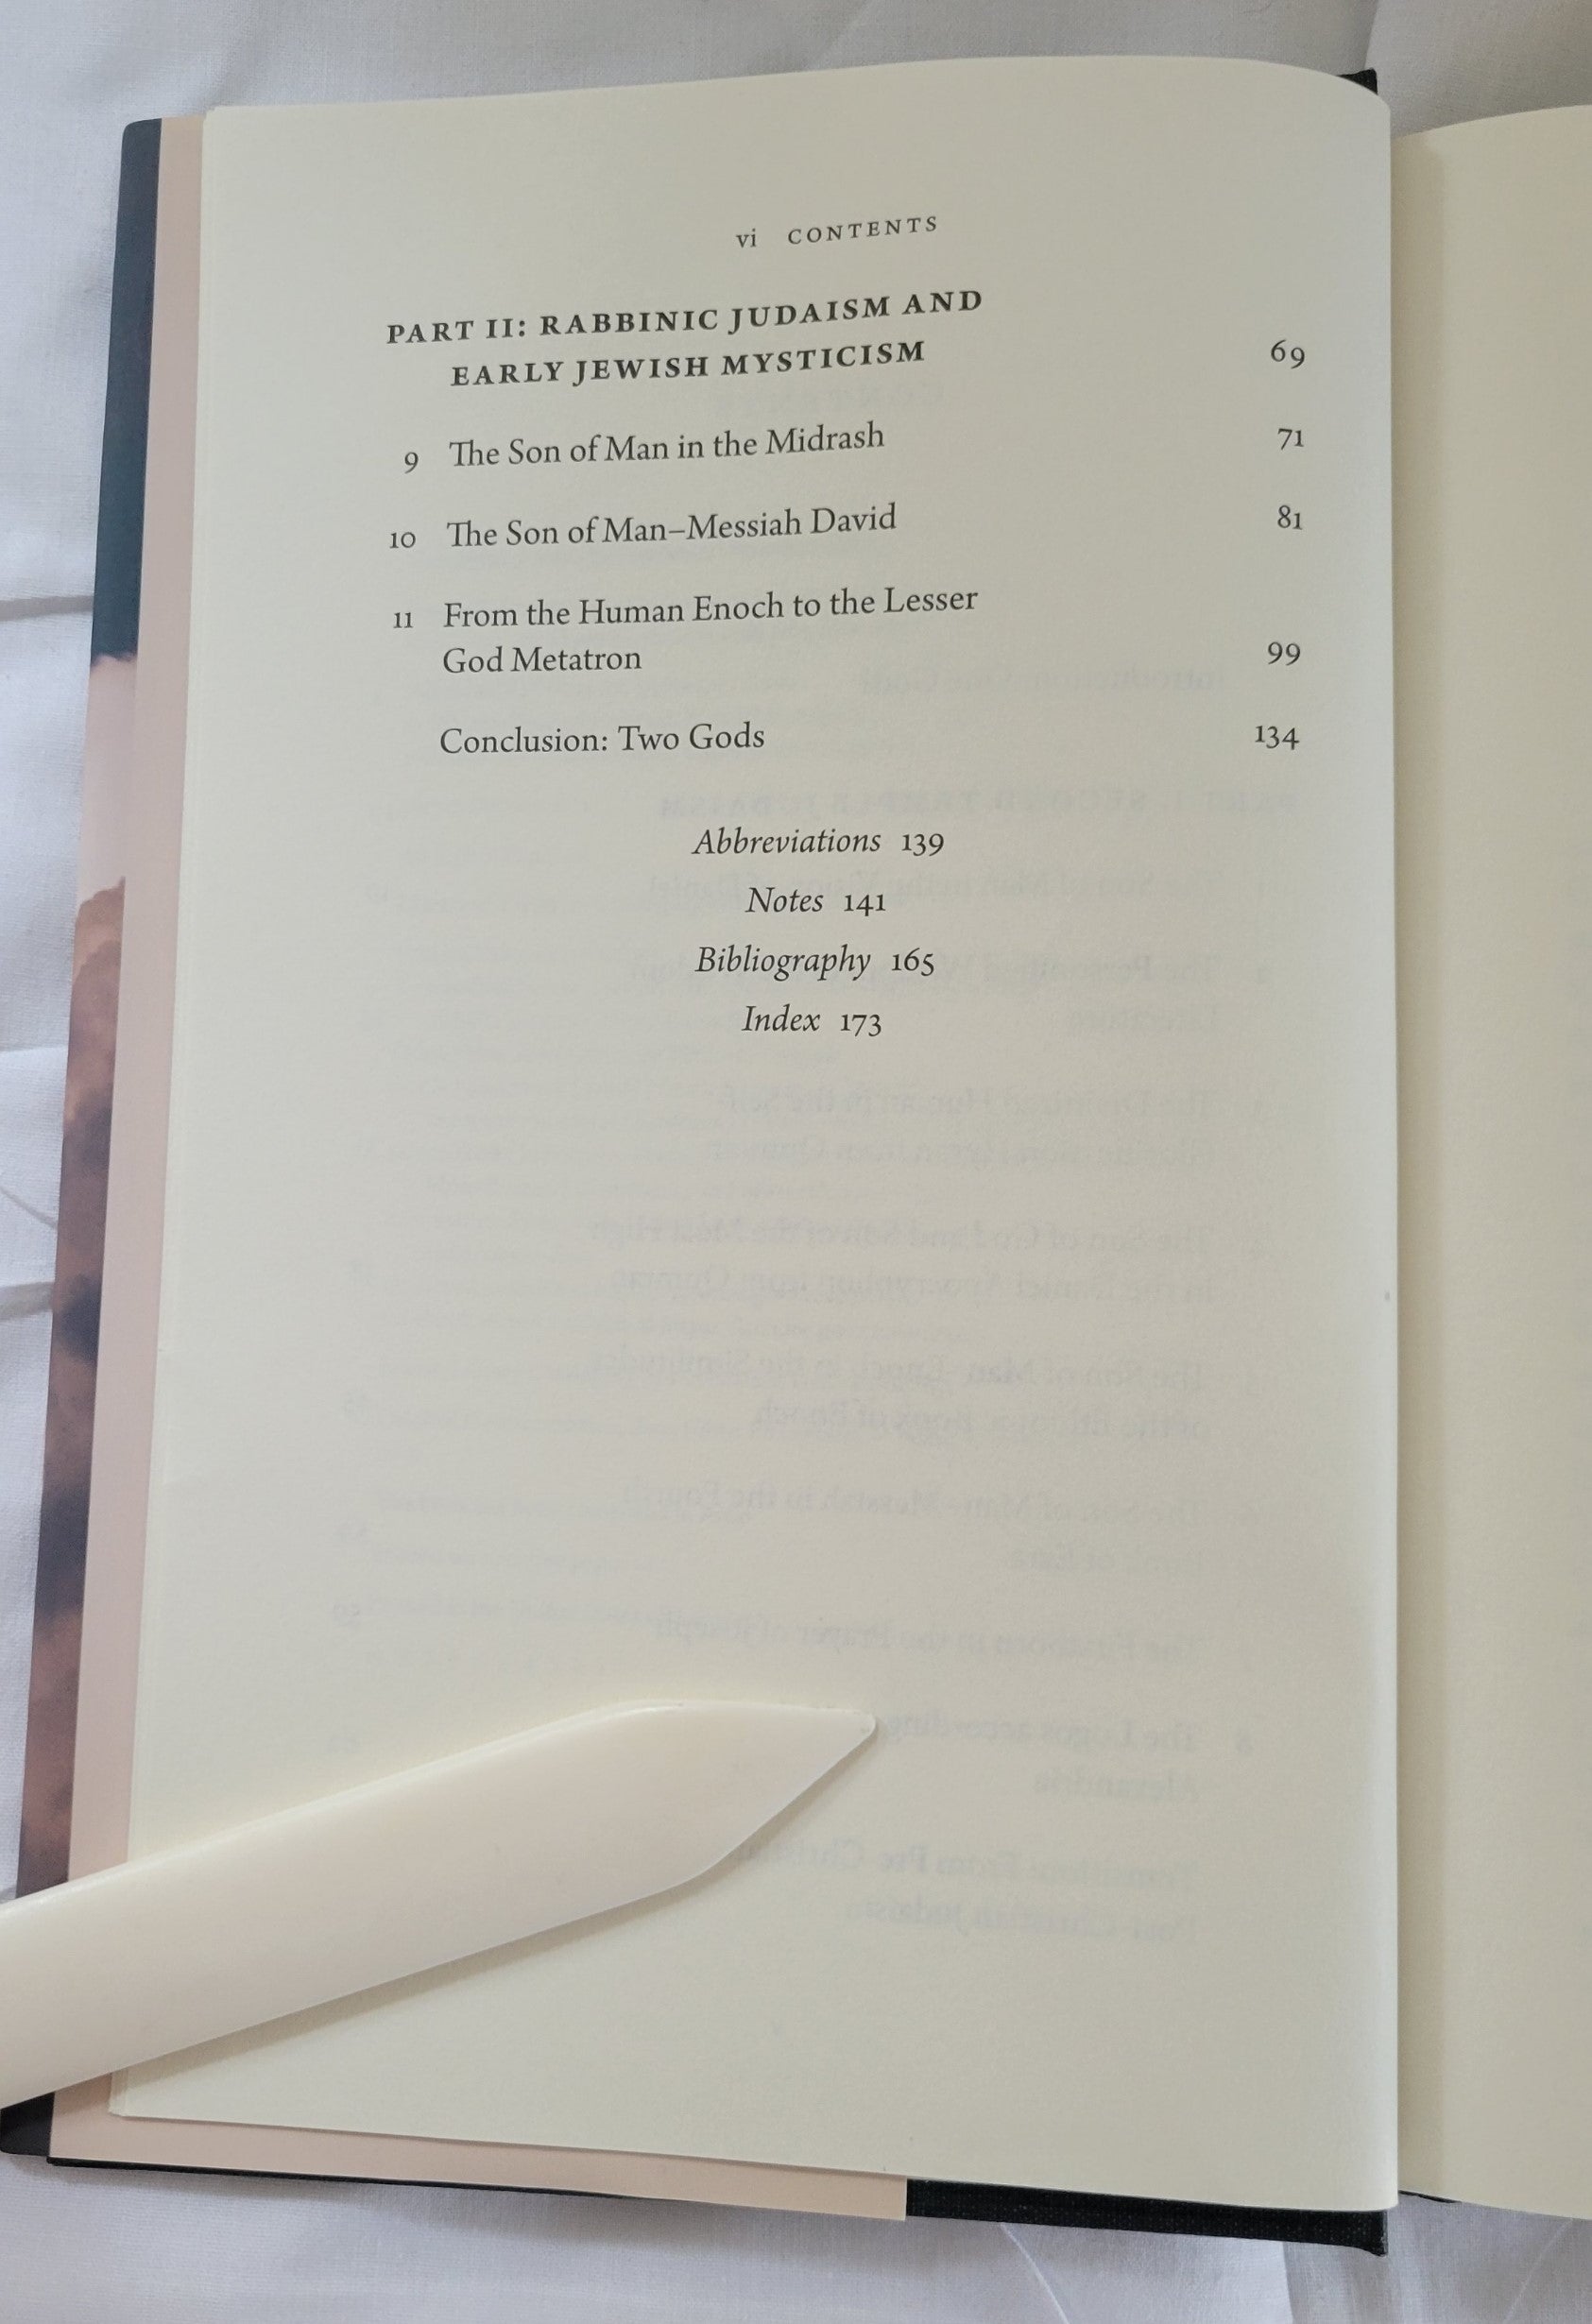 Used book for sale “Two Gods in Heaven: Jewish Concepts of God in Antiquity” written by Peter Schäfer. Table of contents.